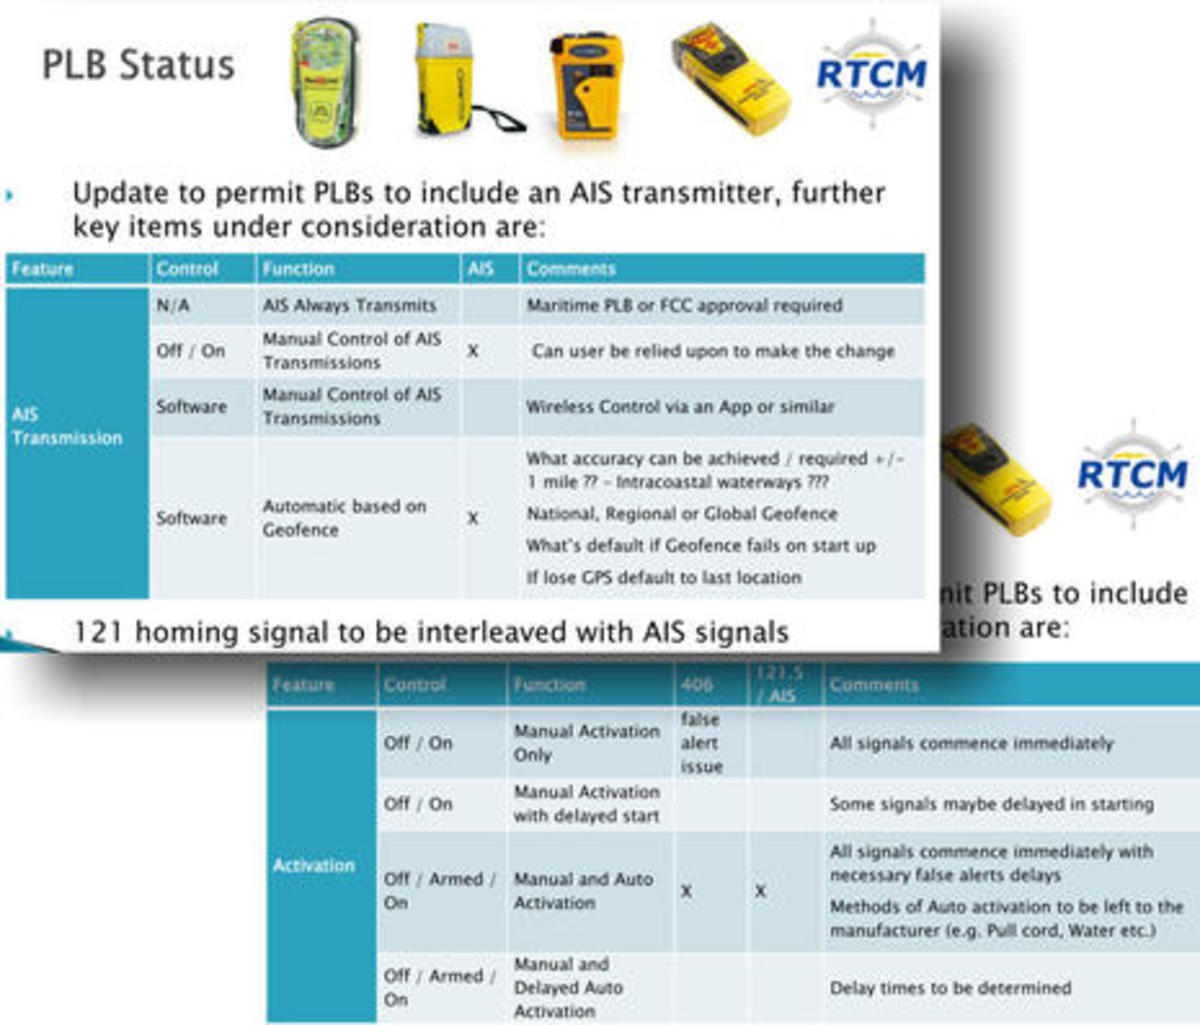 AIS_PLBs_standards_in_development_by_RTCM_aPanbo.jpg